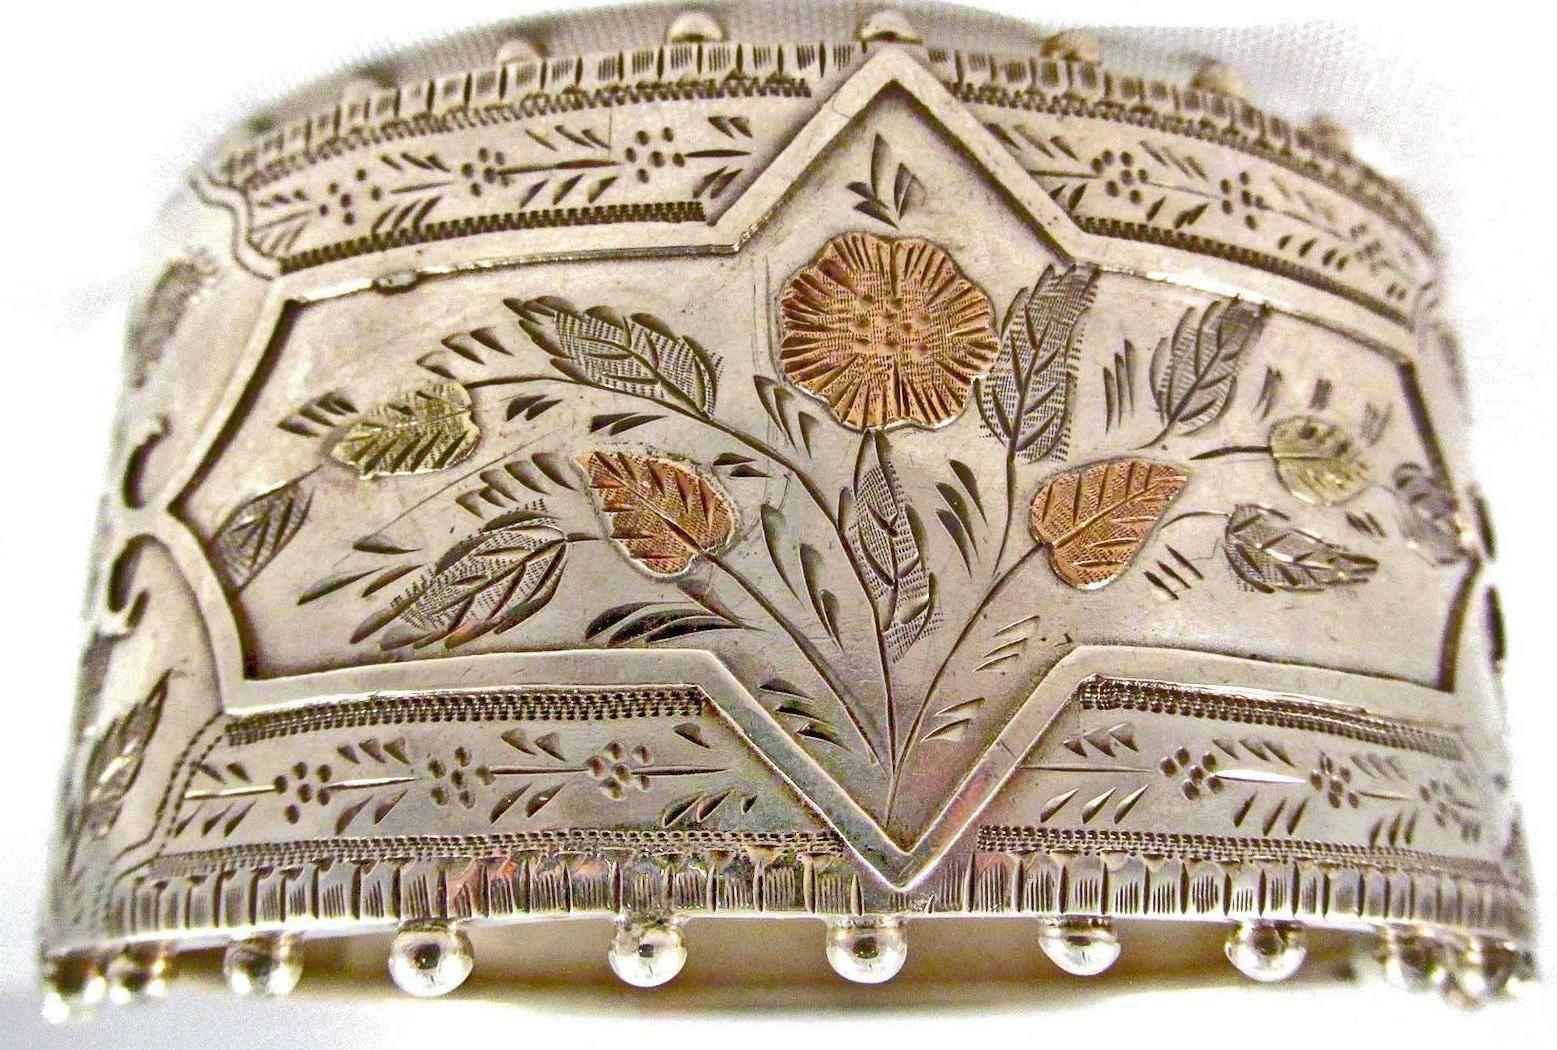 Victorian silver and two-color gold cuff or bangle bracelet. Wearable day or night this bracelet is decorated with beading on its rims. Its interior measurement is 2